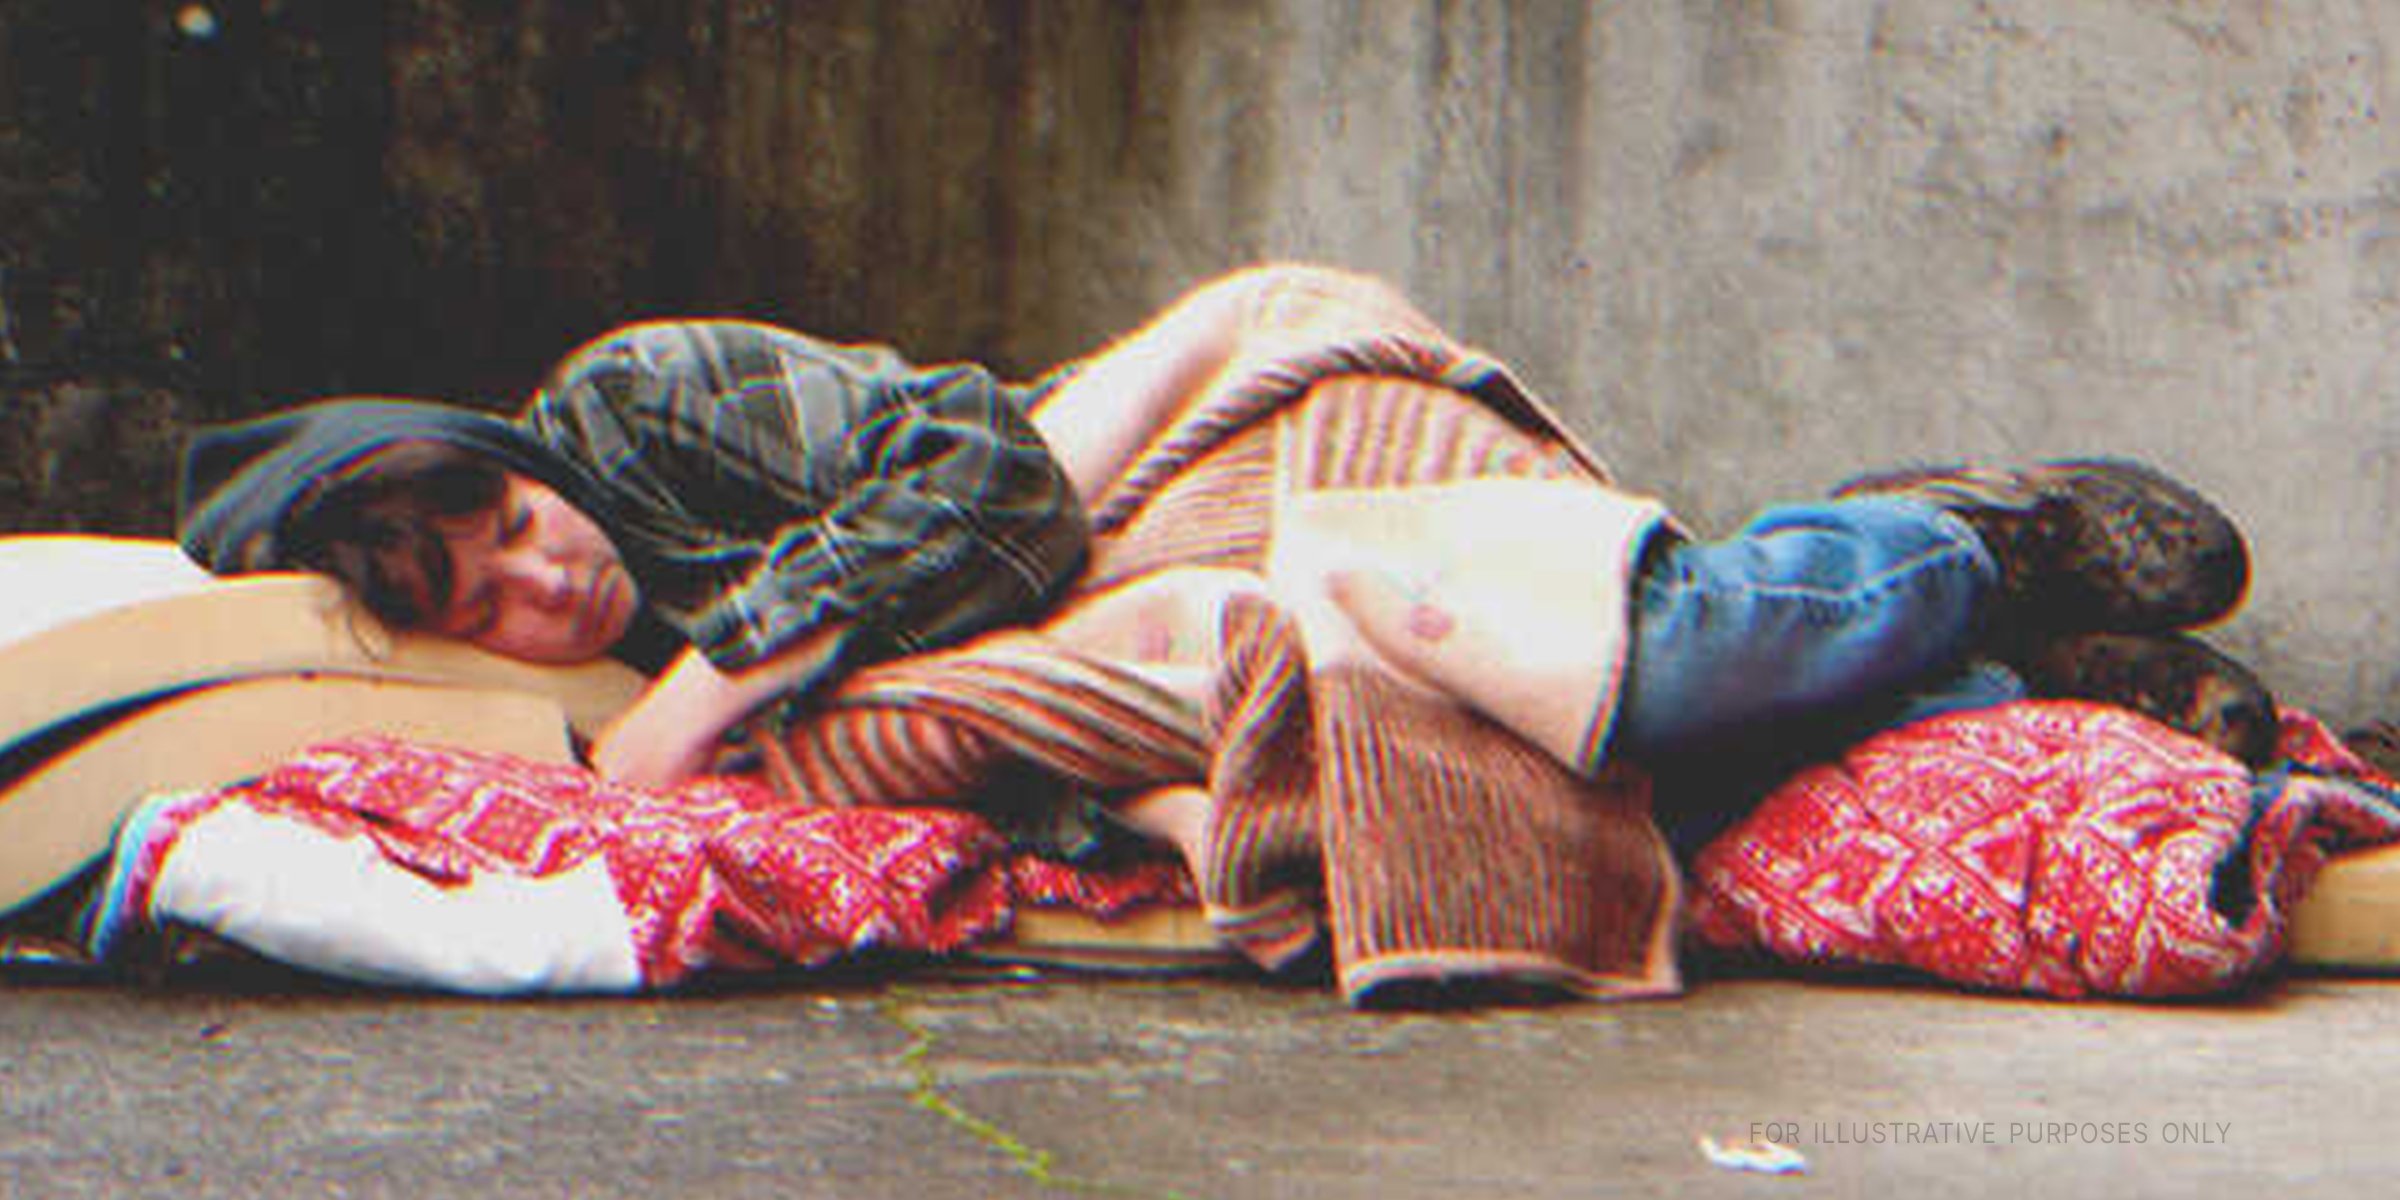 Pregnant Woman Sleeping On the Ground. | Source: Getty Images